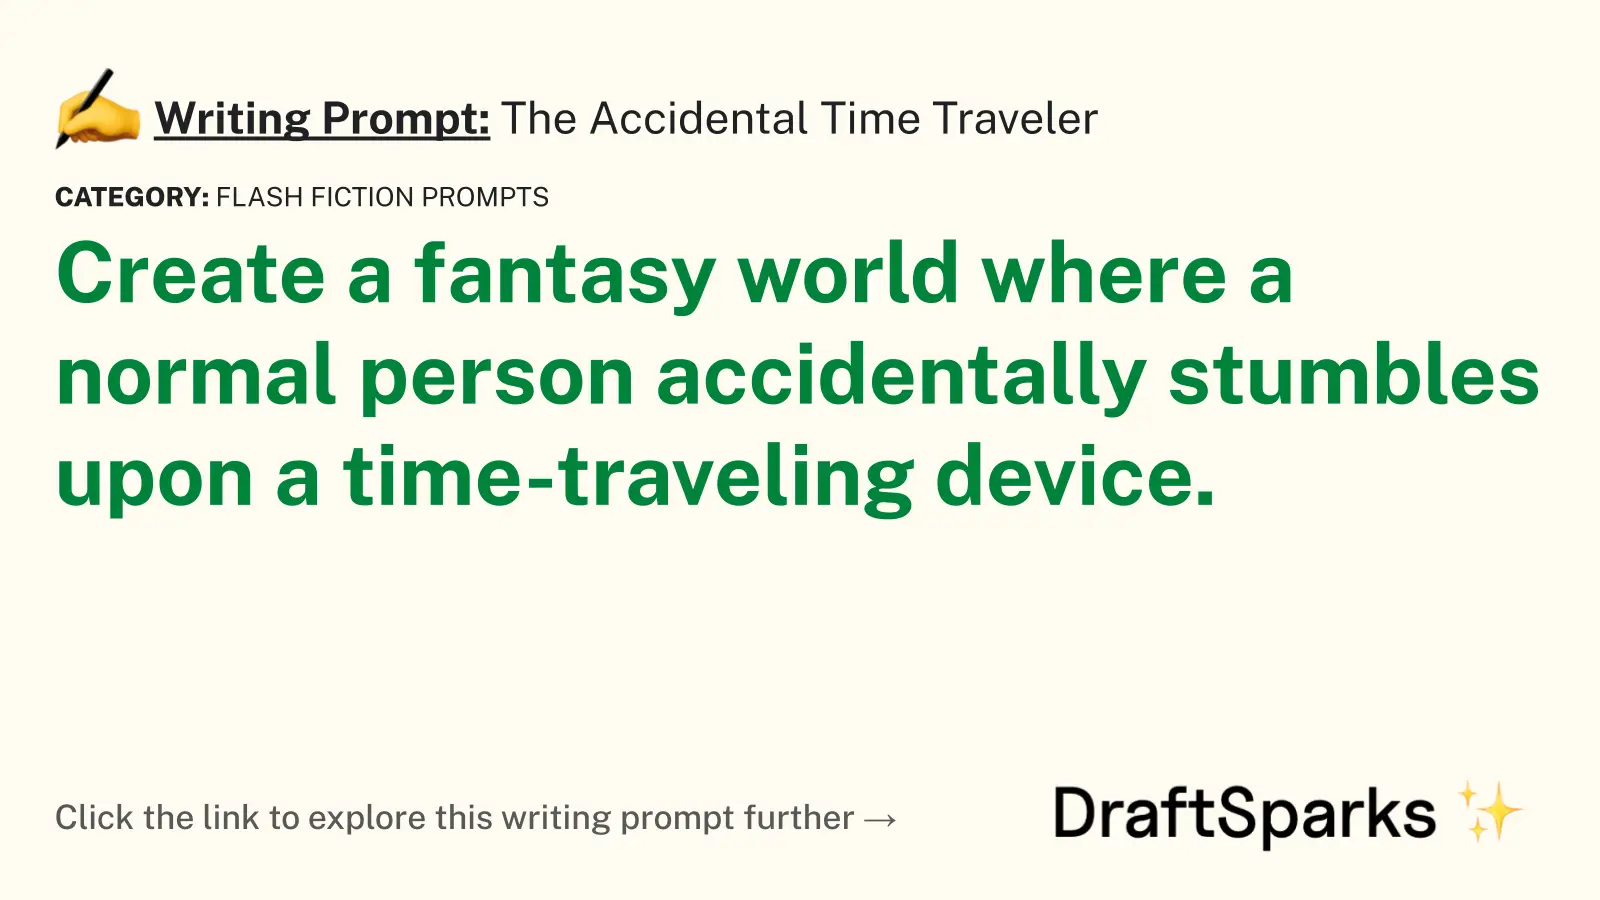 The Accidental Time Traveler